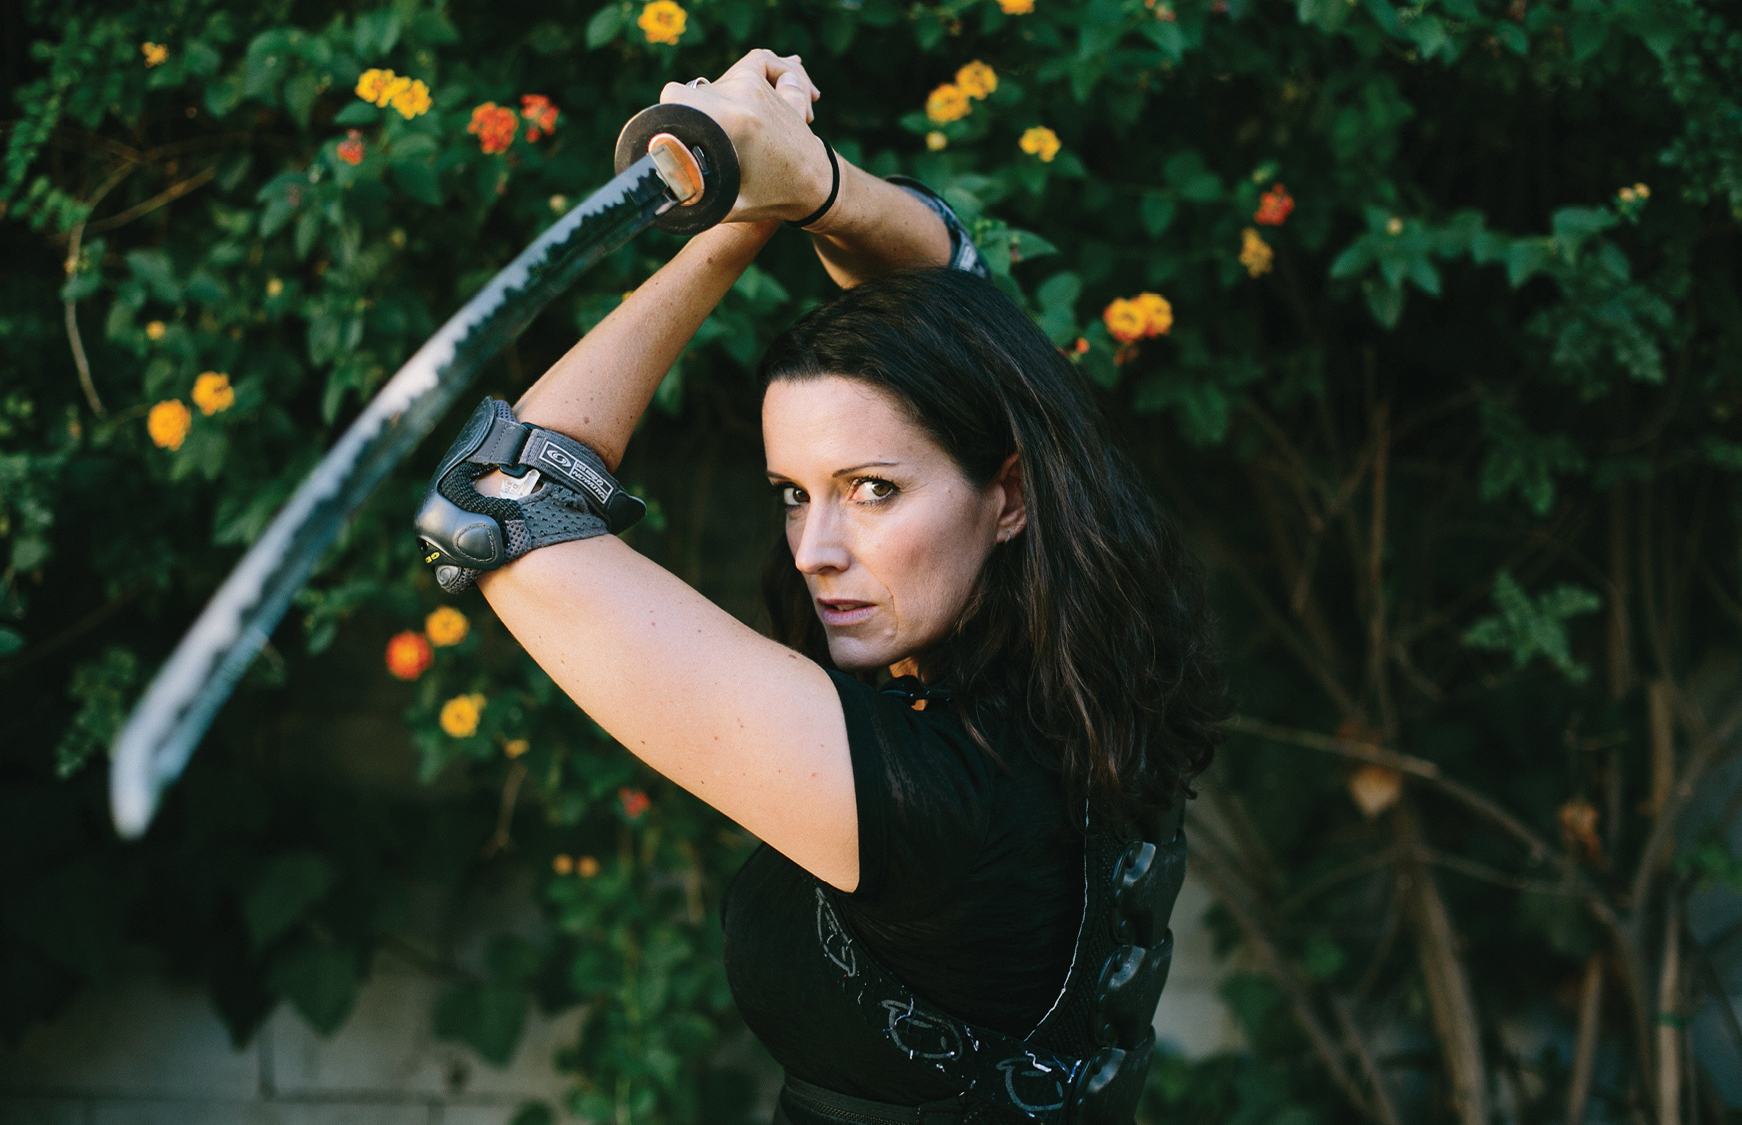 An Interview With Ky Furneaux: Author, Stunt Woman, and Survival Expert Image